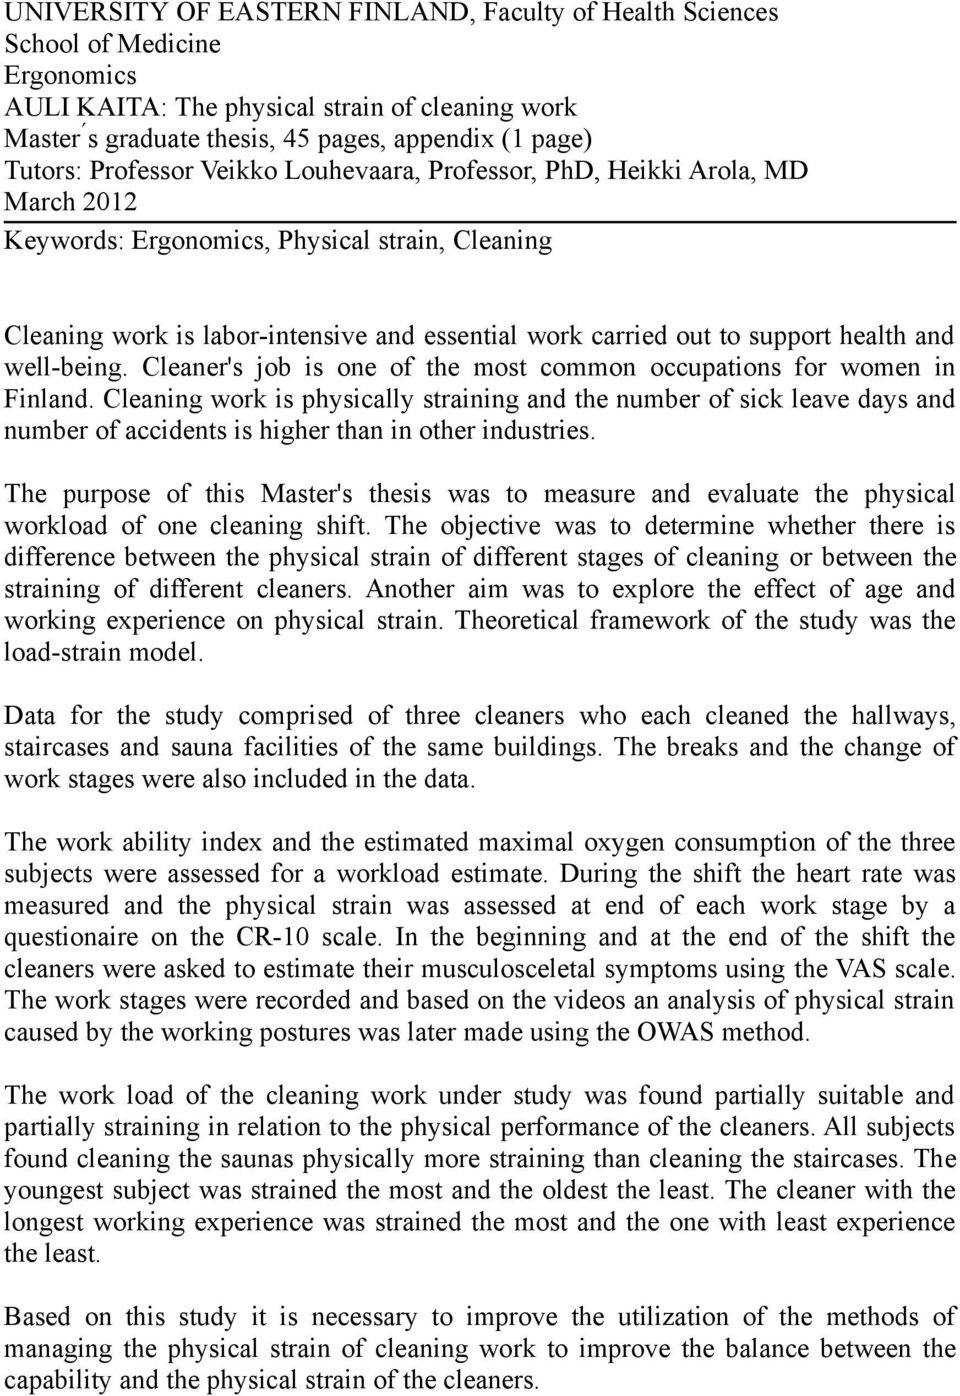 health and well-being. Cleaner's job is one of the most common occupations for women in Finland.